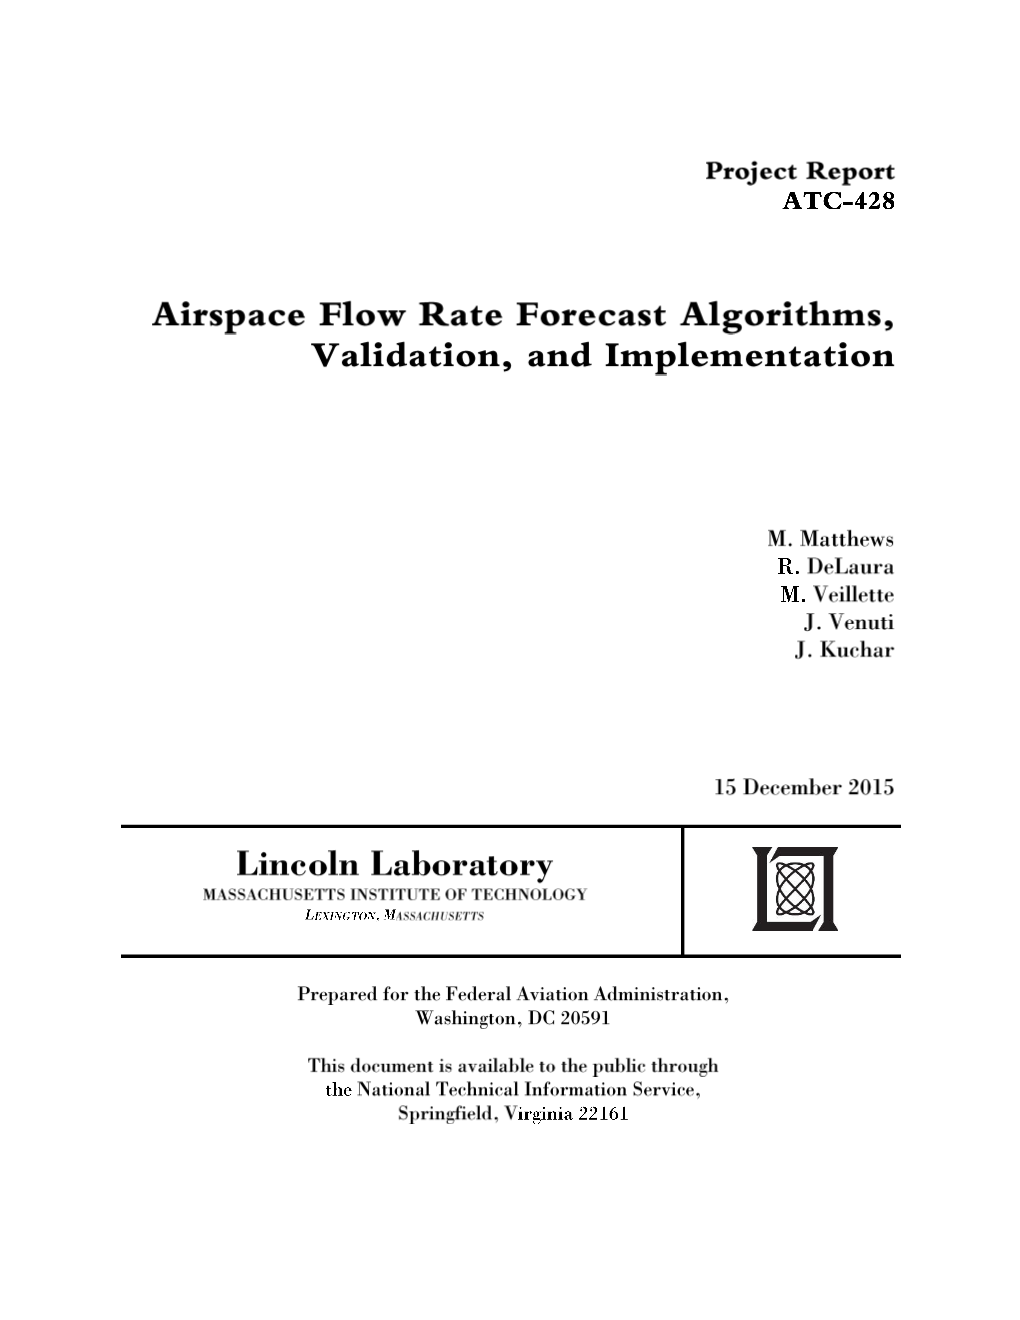 Airspace Flow Rate Forecast Algorithms, Validation, and Implementation